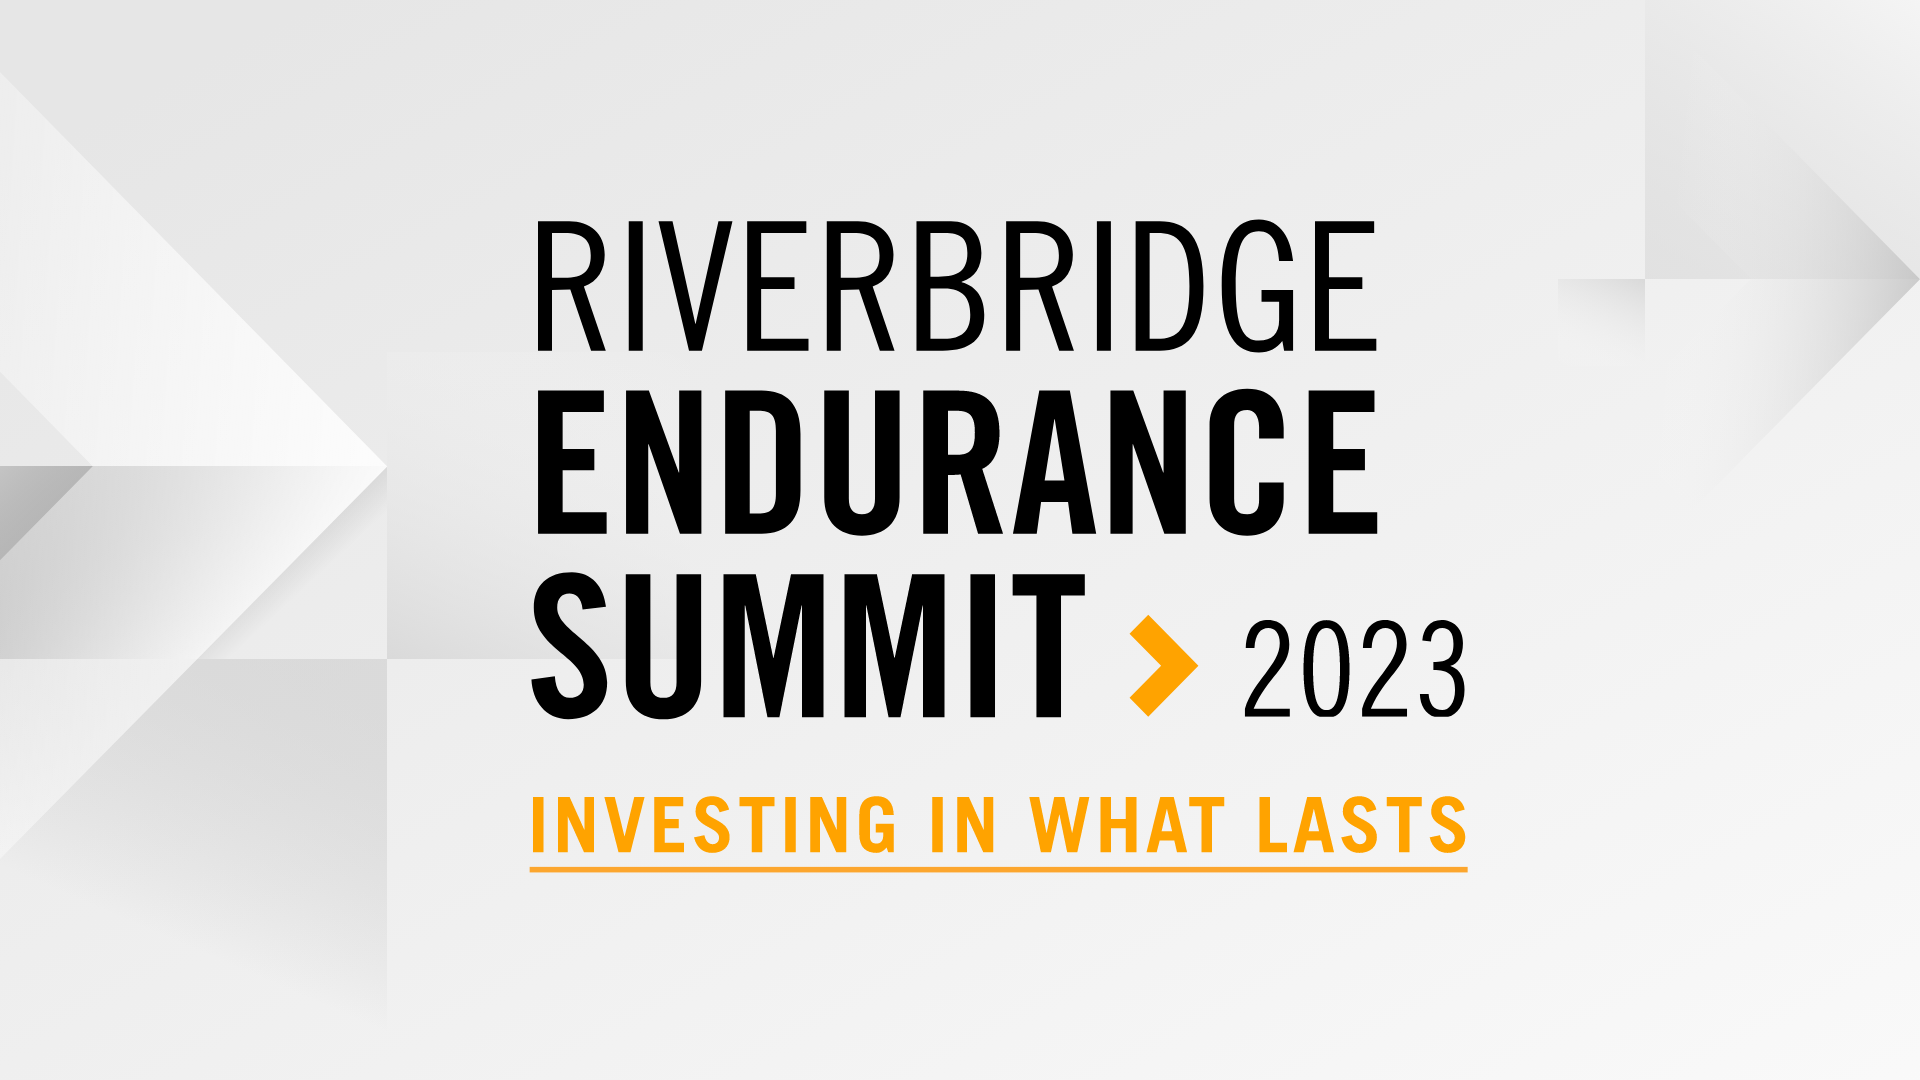 Riverbridge Endurance Summit 2023, Investing in what lasts